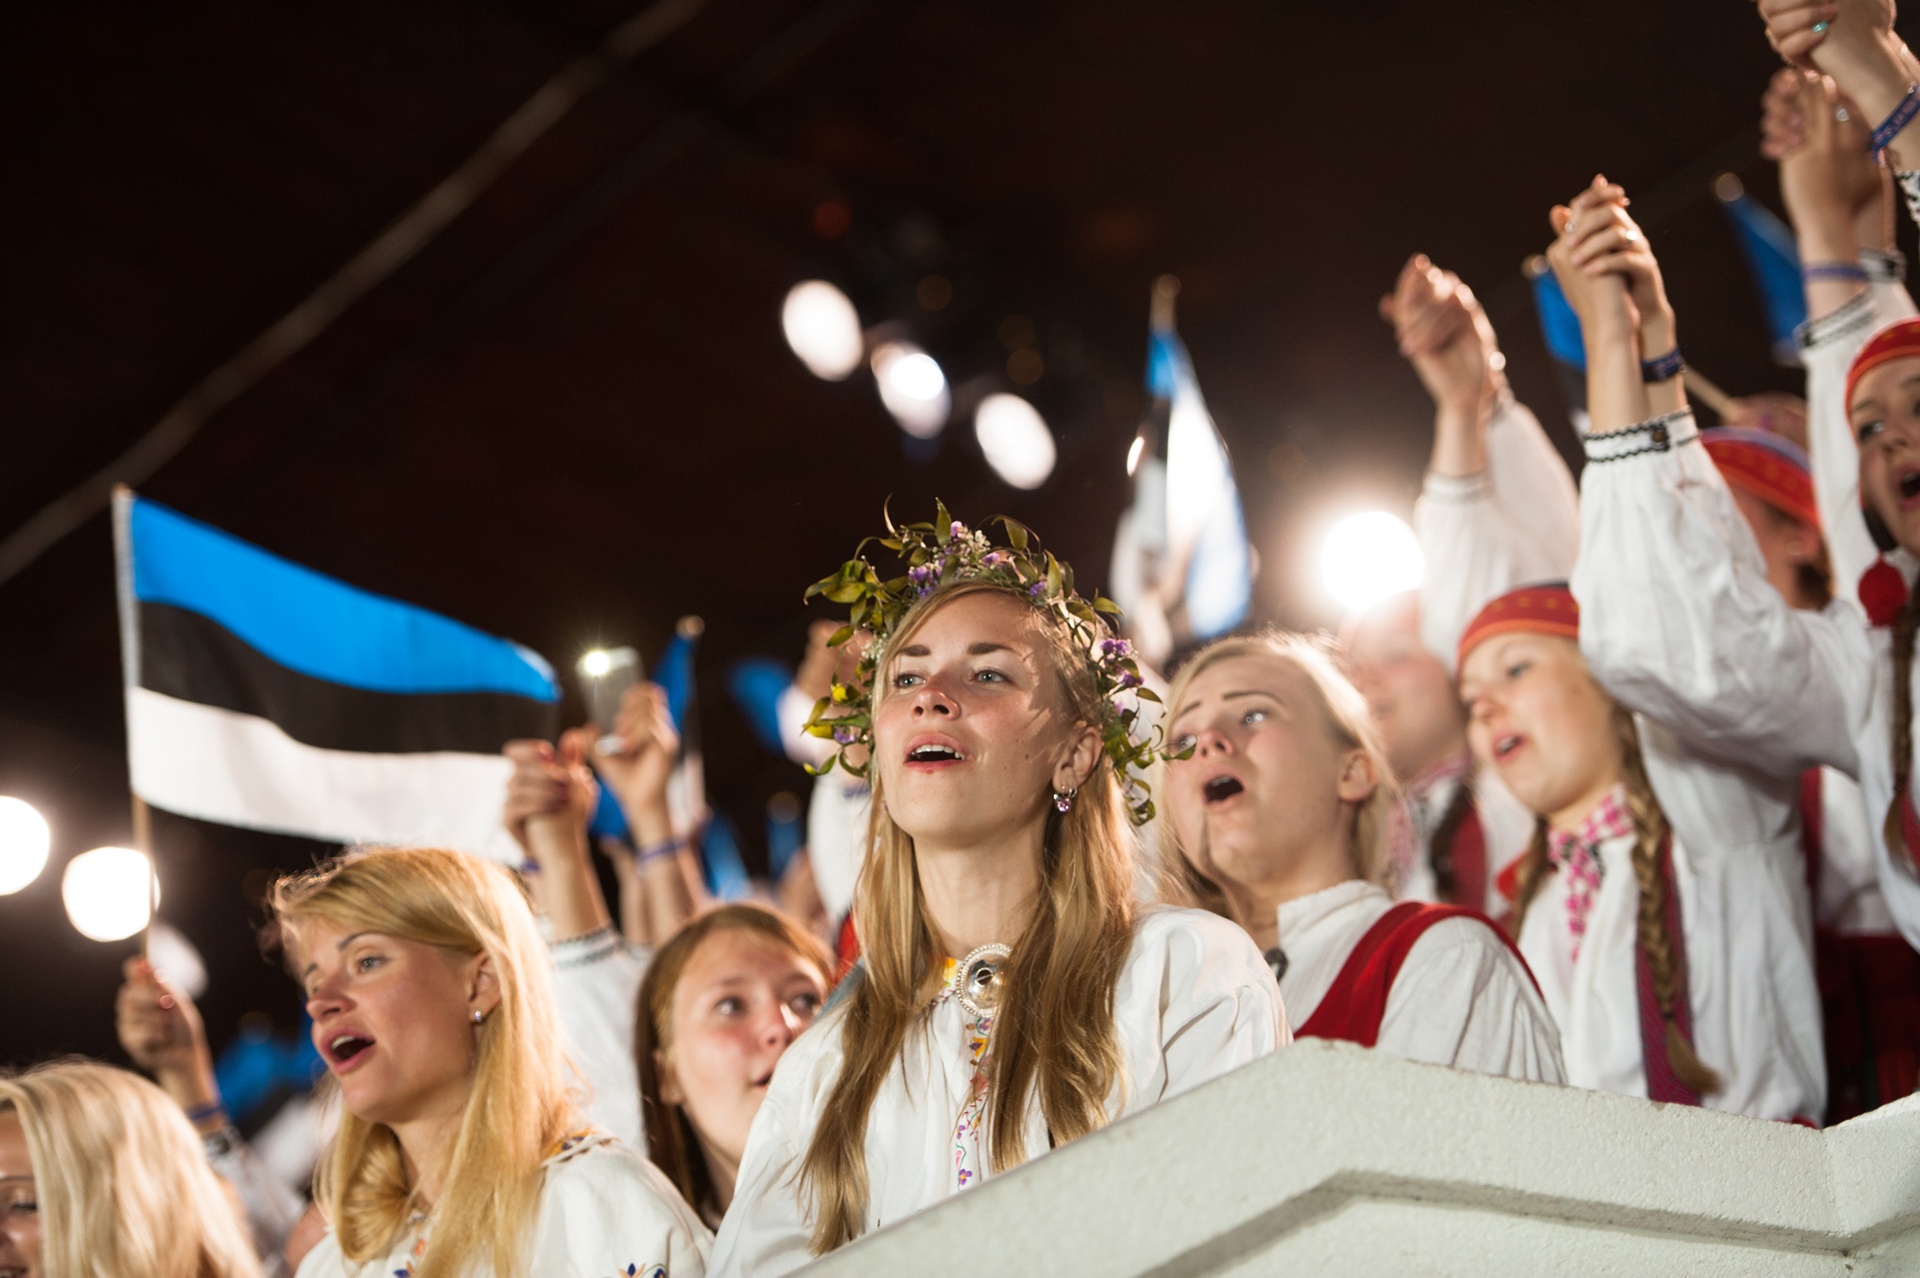 Girls singing during the Song Festival with Estonian flag